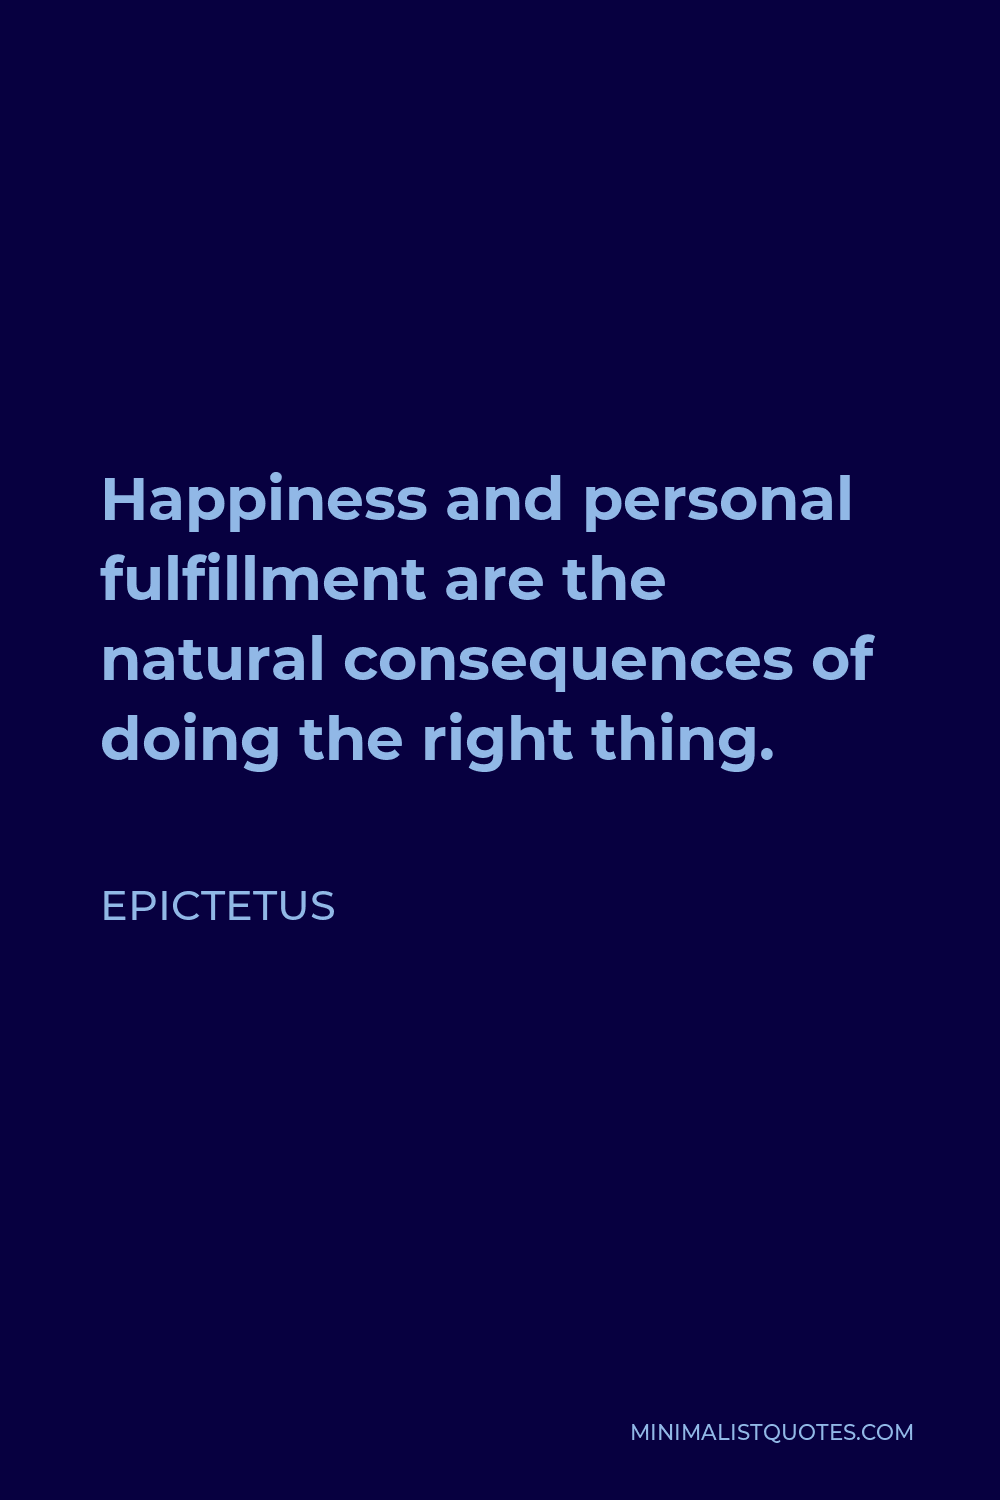 Epictetus Quote - Happiness and personal fulfillment are the natural consequences of doing the right thing.